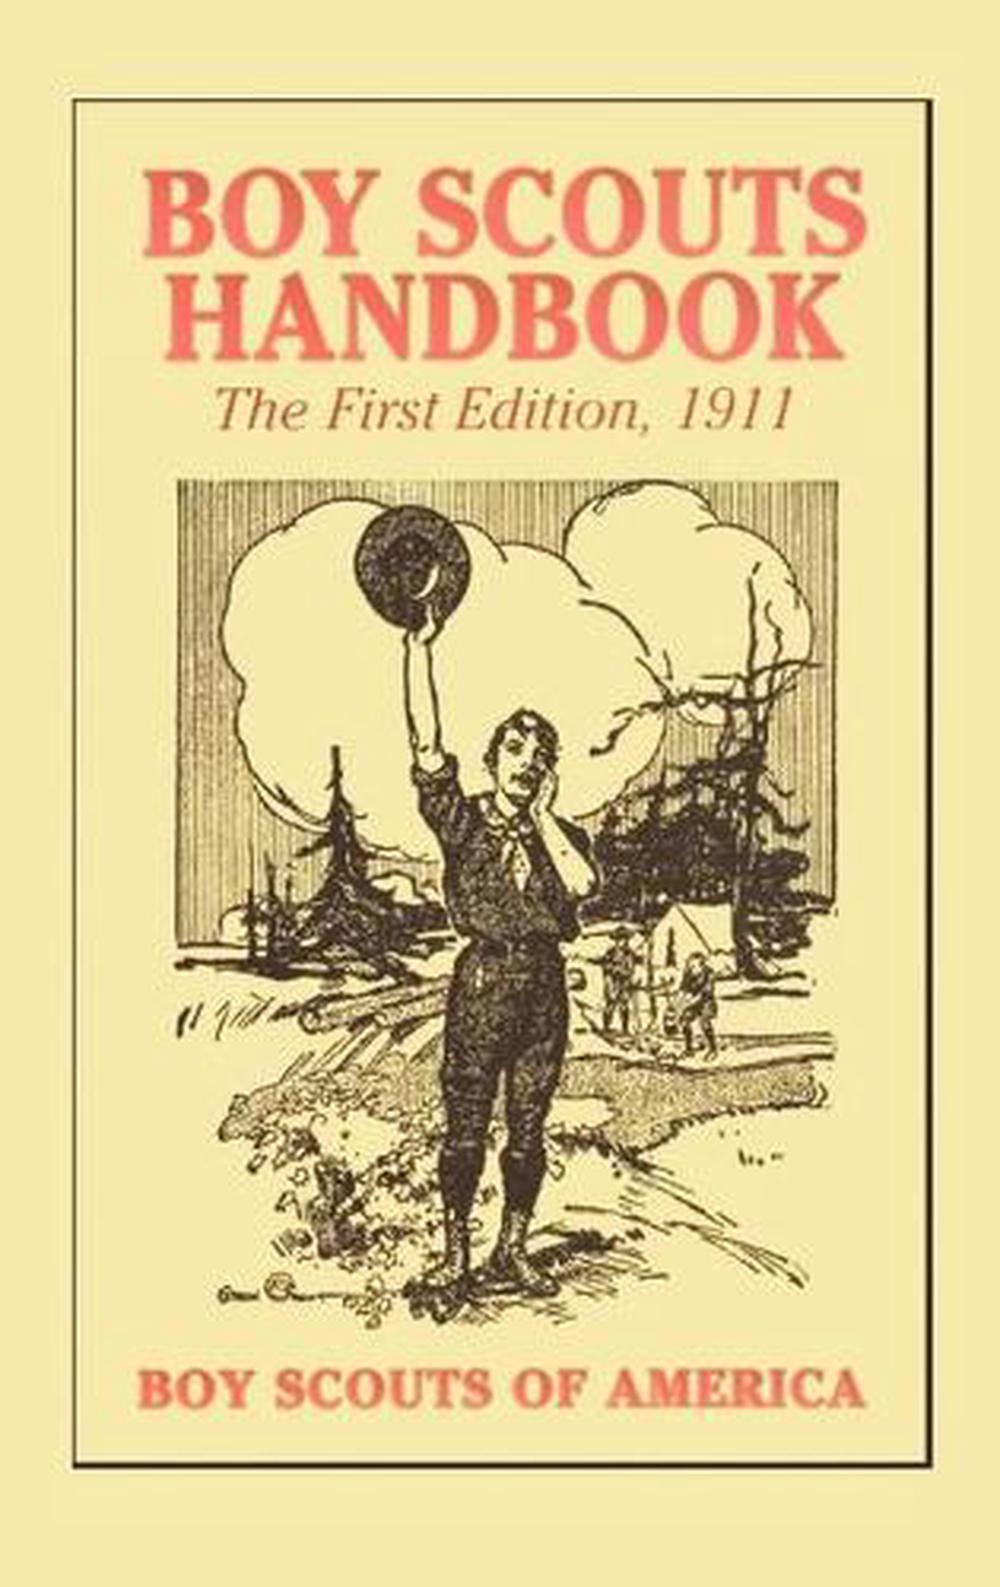 Boy Scouts Handbook, 1st Edition, 1911 by Boy Scouts of America (English) Hardco 9781849023696